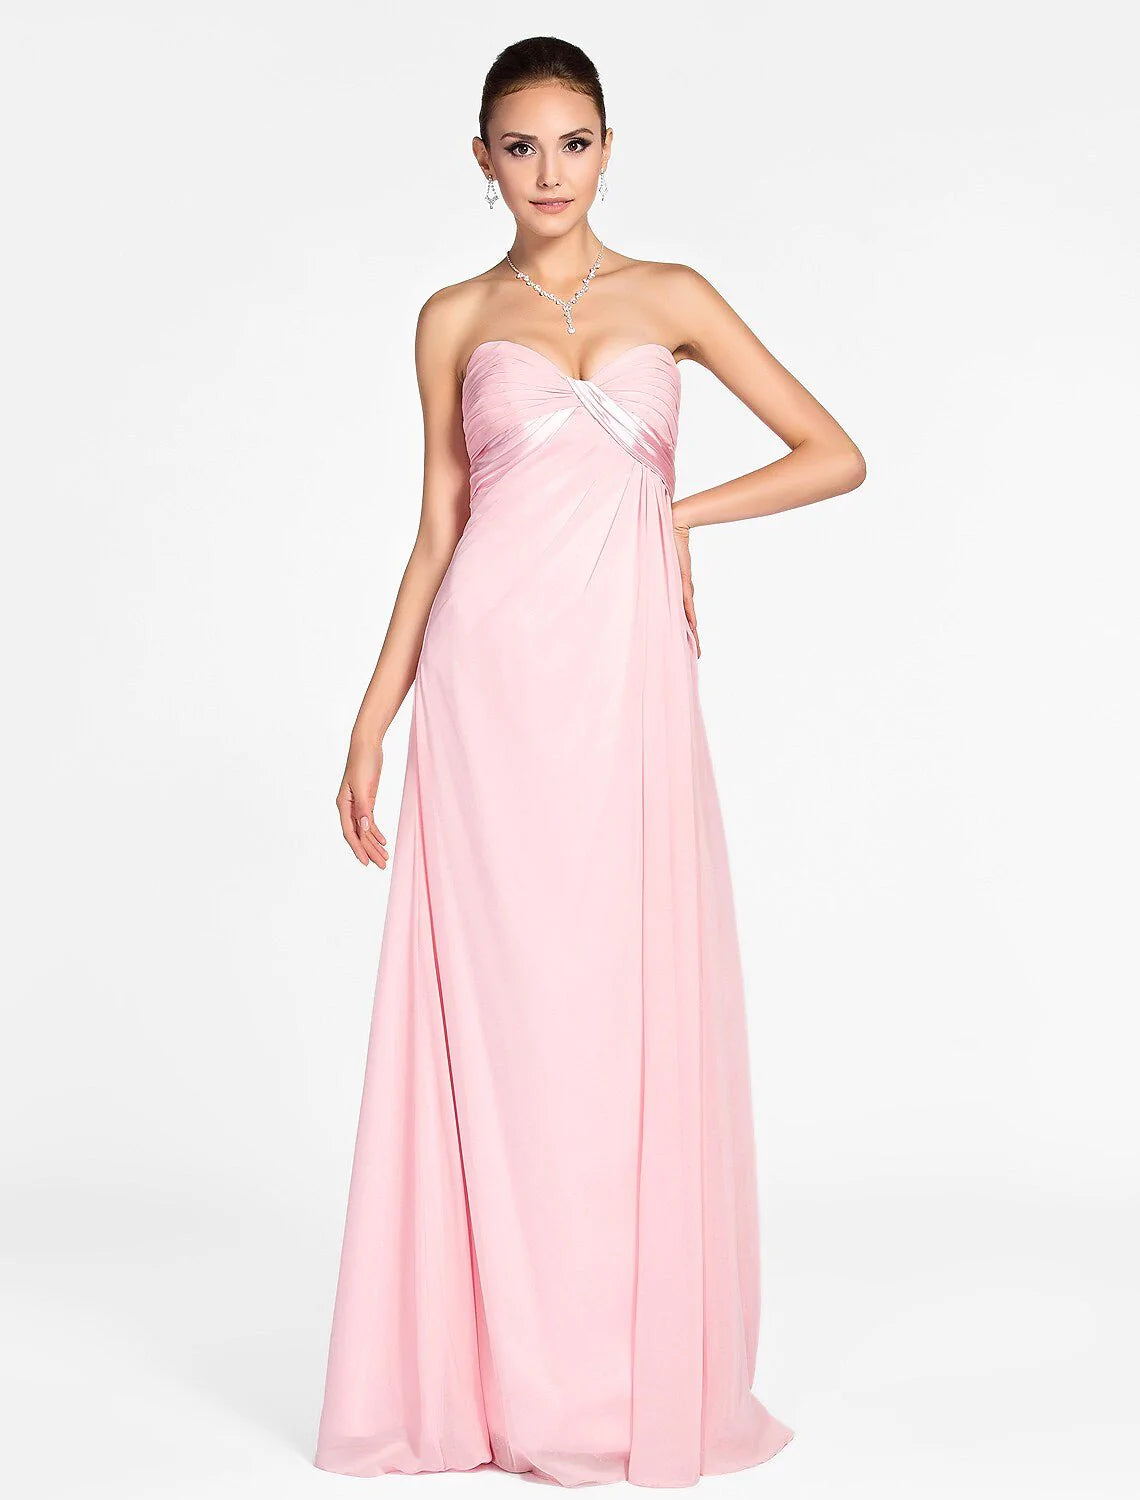 Princess / A-Line Bridesmaid Dress Sweetheart Neckline / Strapless Sleeveless Open Back Floor Length Chiffon with Criss Cross / Draping / Side Draping - RongMoon